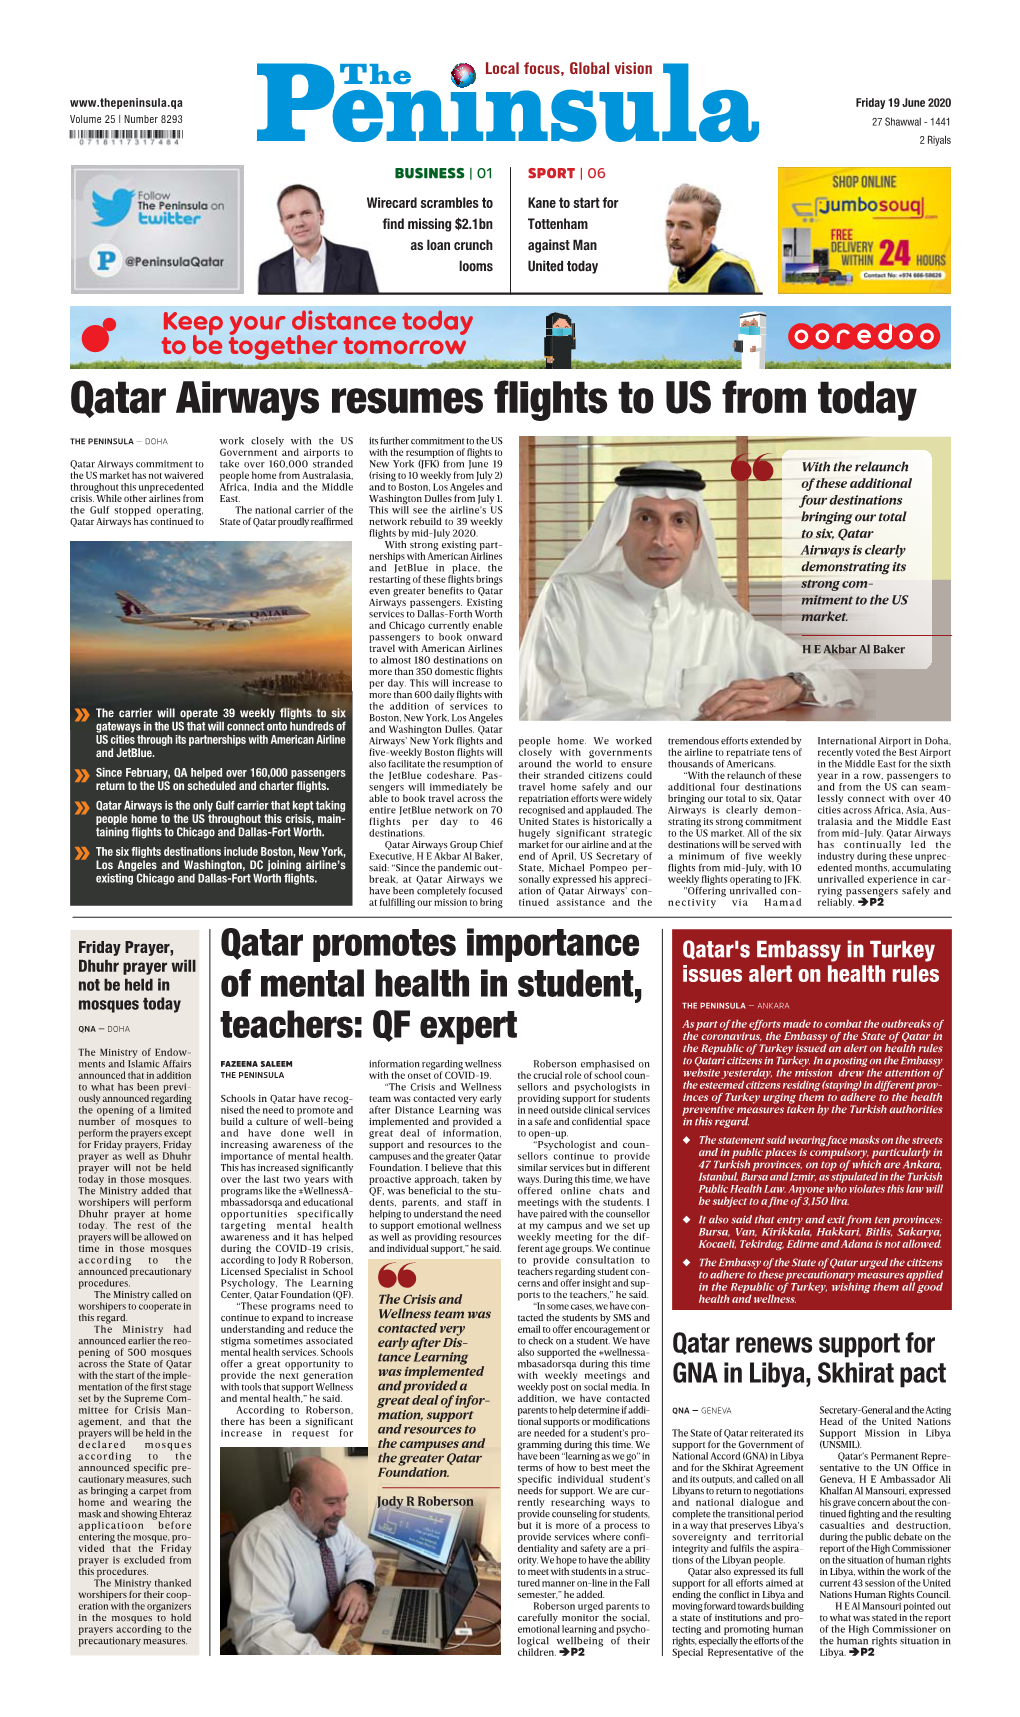 Qatar Airways Resumes Flights to US from Today